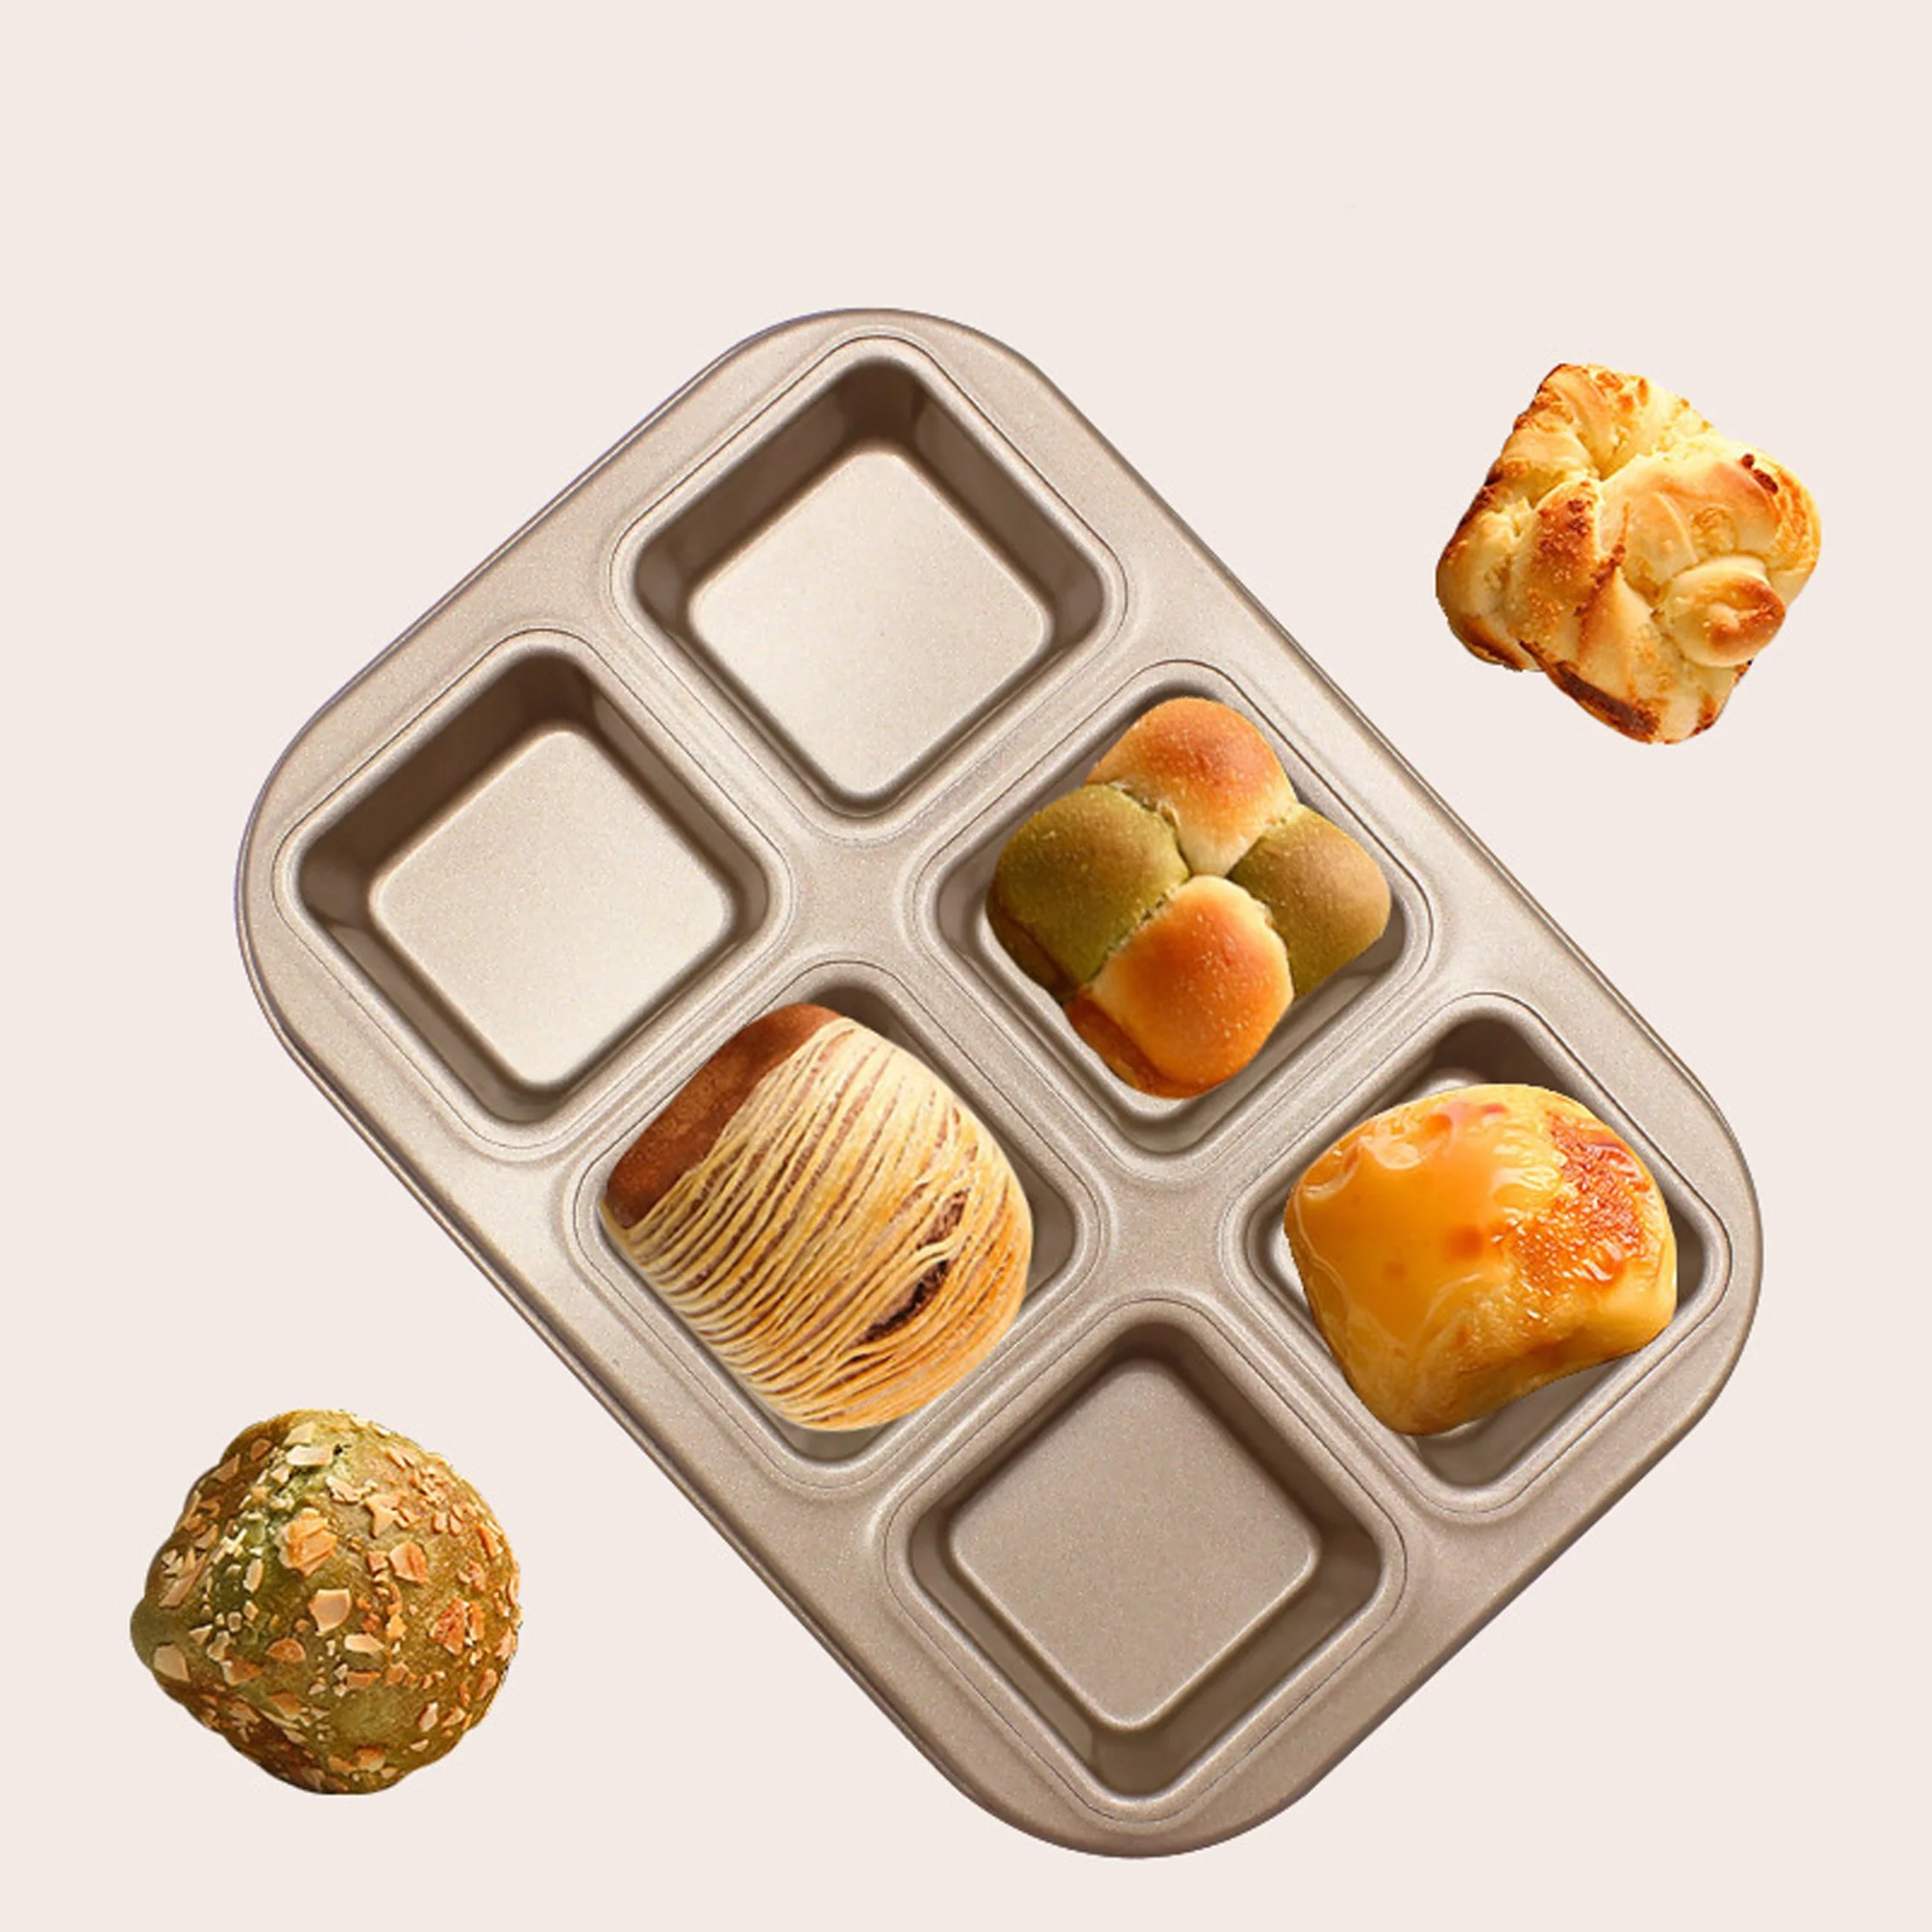 Hot Selling 6 Cavity Non Stick Carbon Steel Mini Loaf Pan For Diy Rectangle Baking Mold Cake Pan Mold Aluminum alloy cake molds